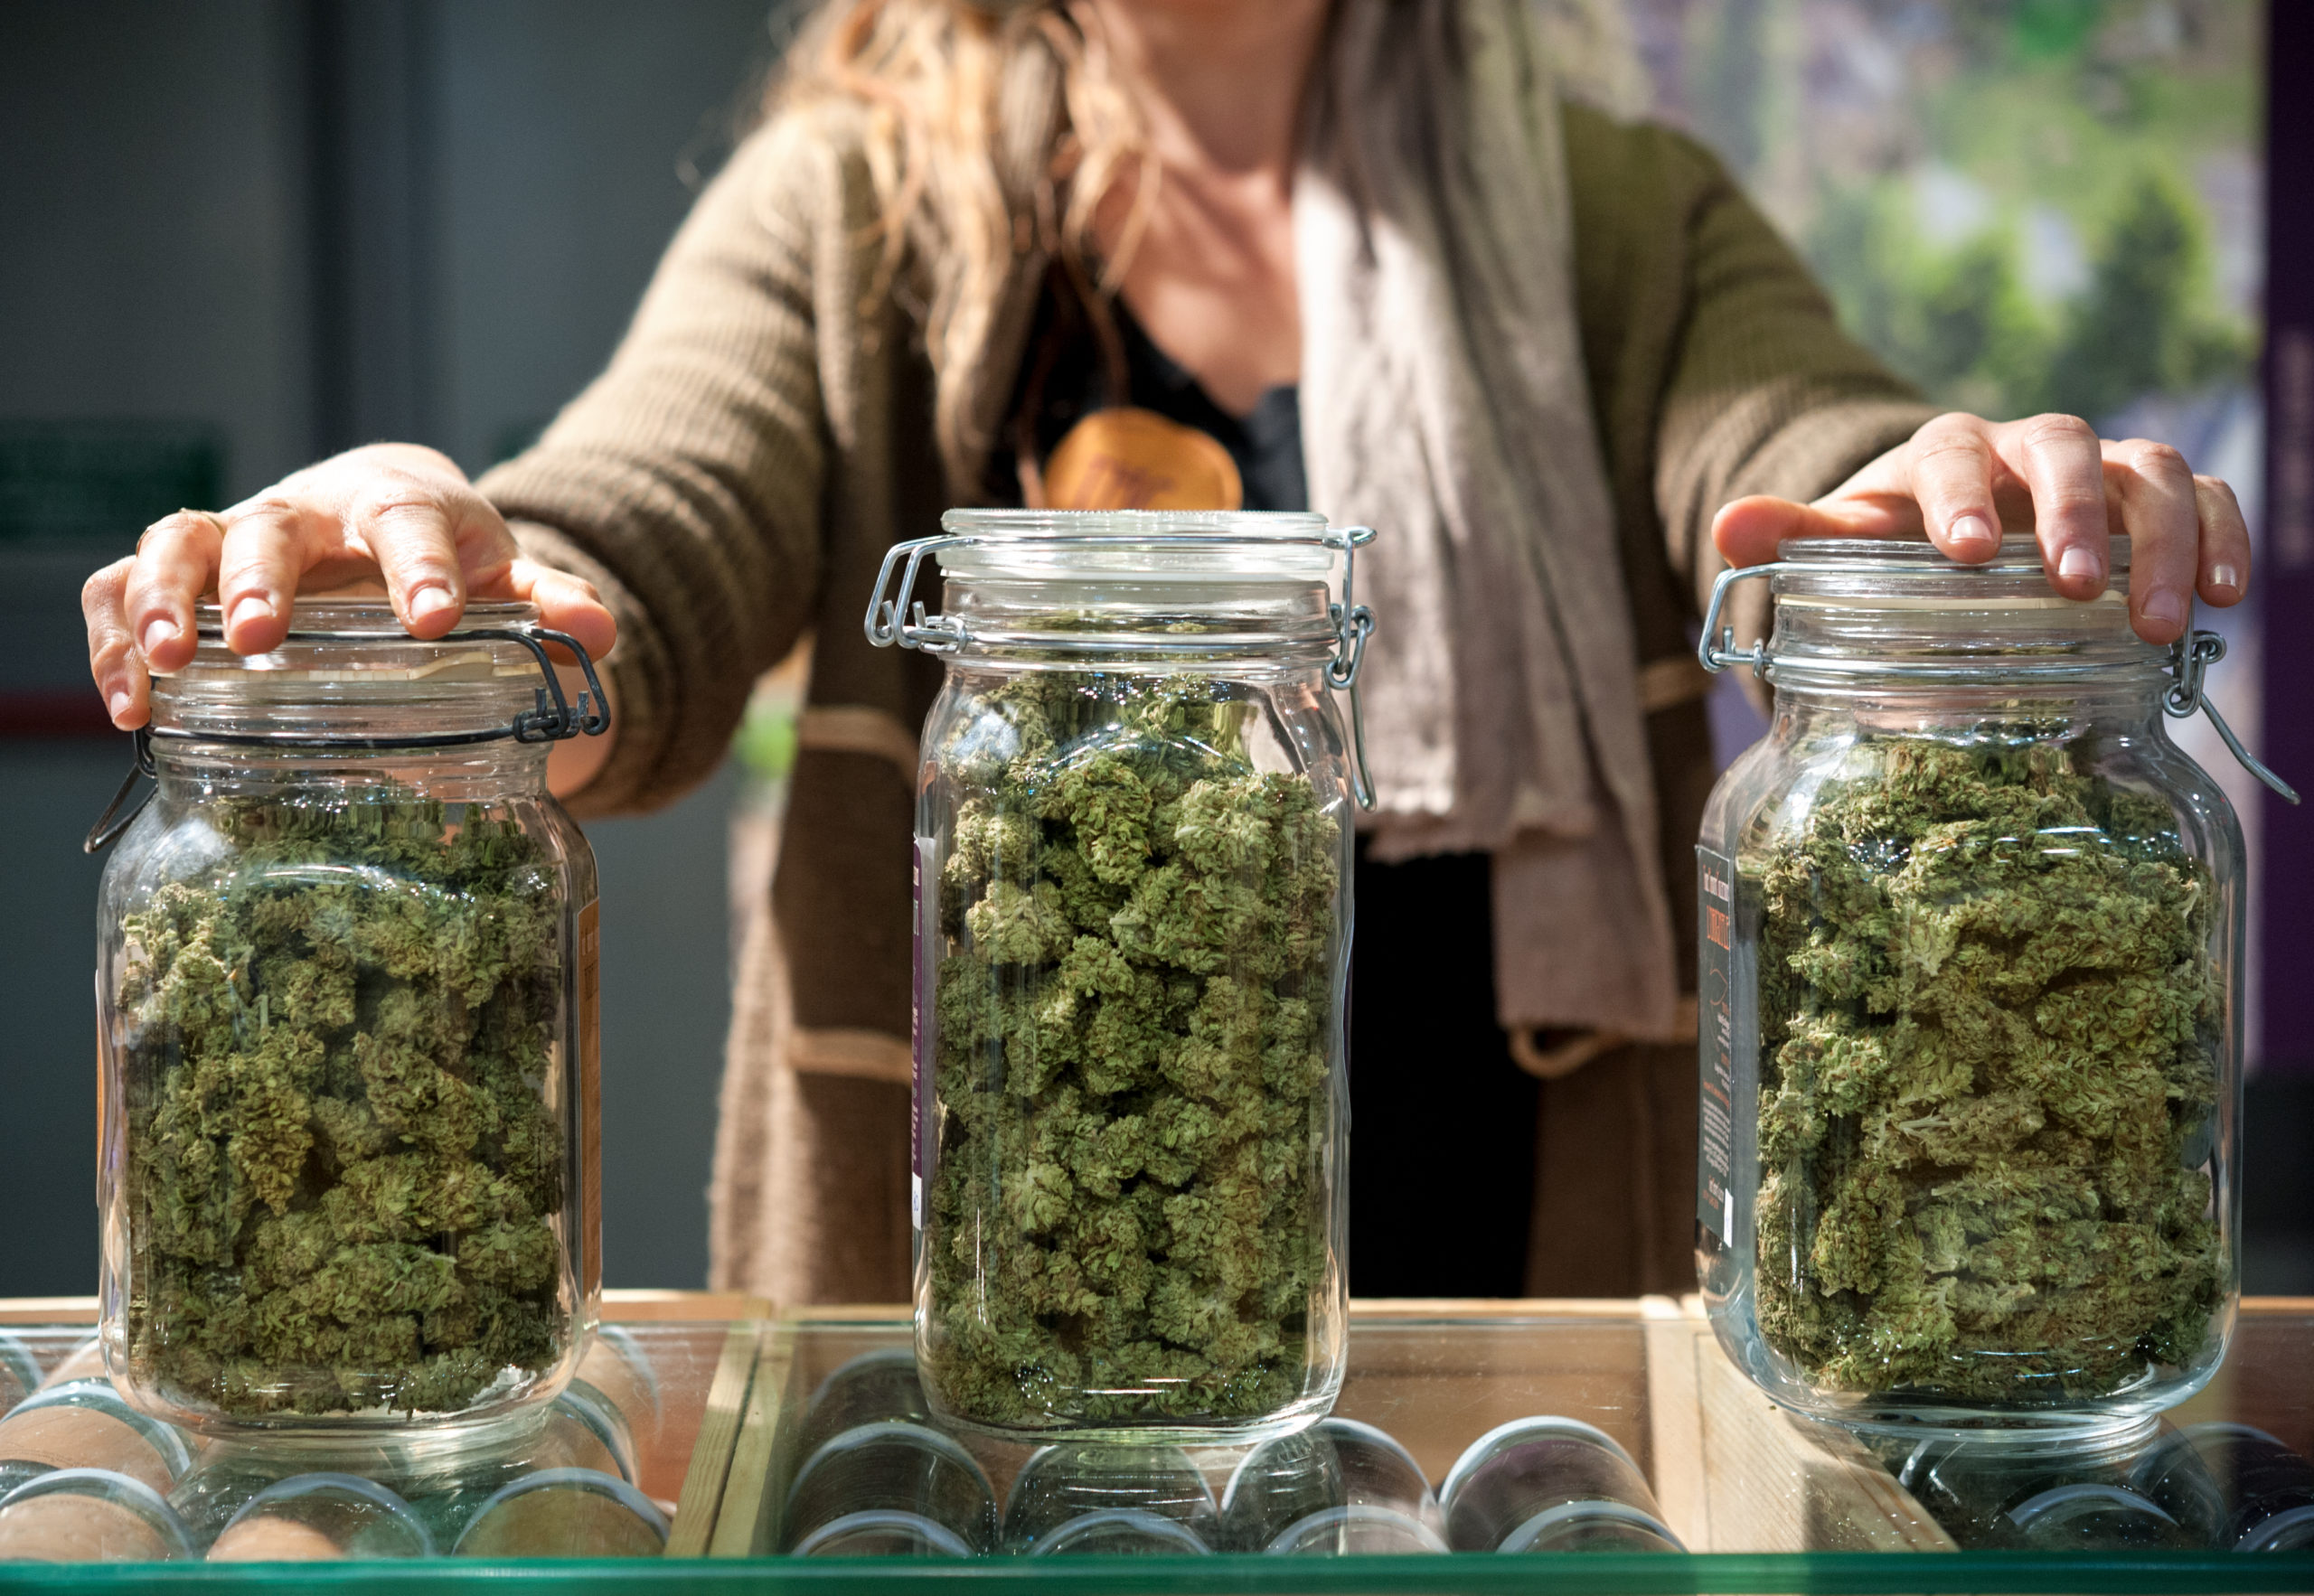 Find the best dispensary to Order weed online in a fairly secure way